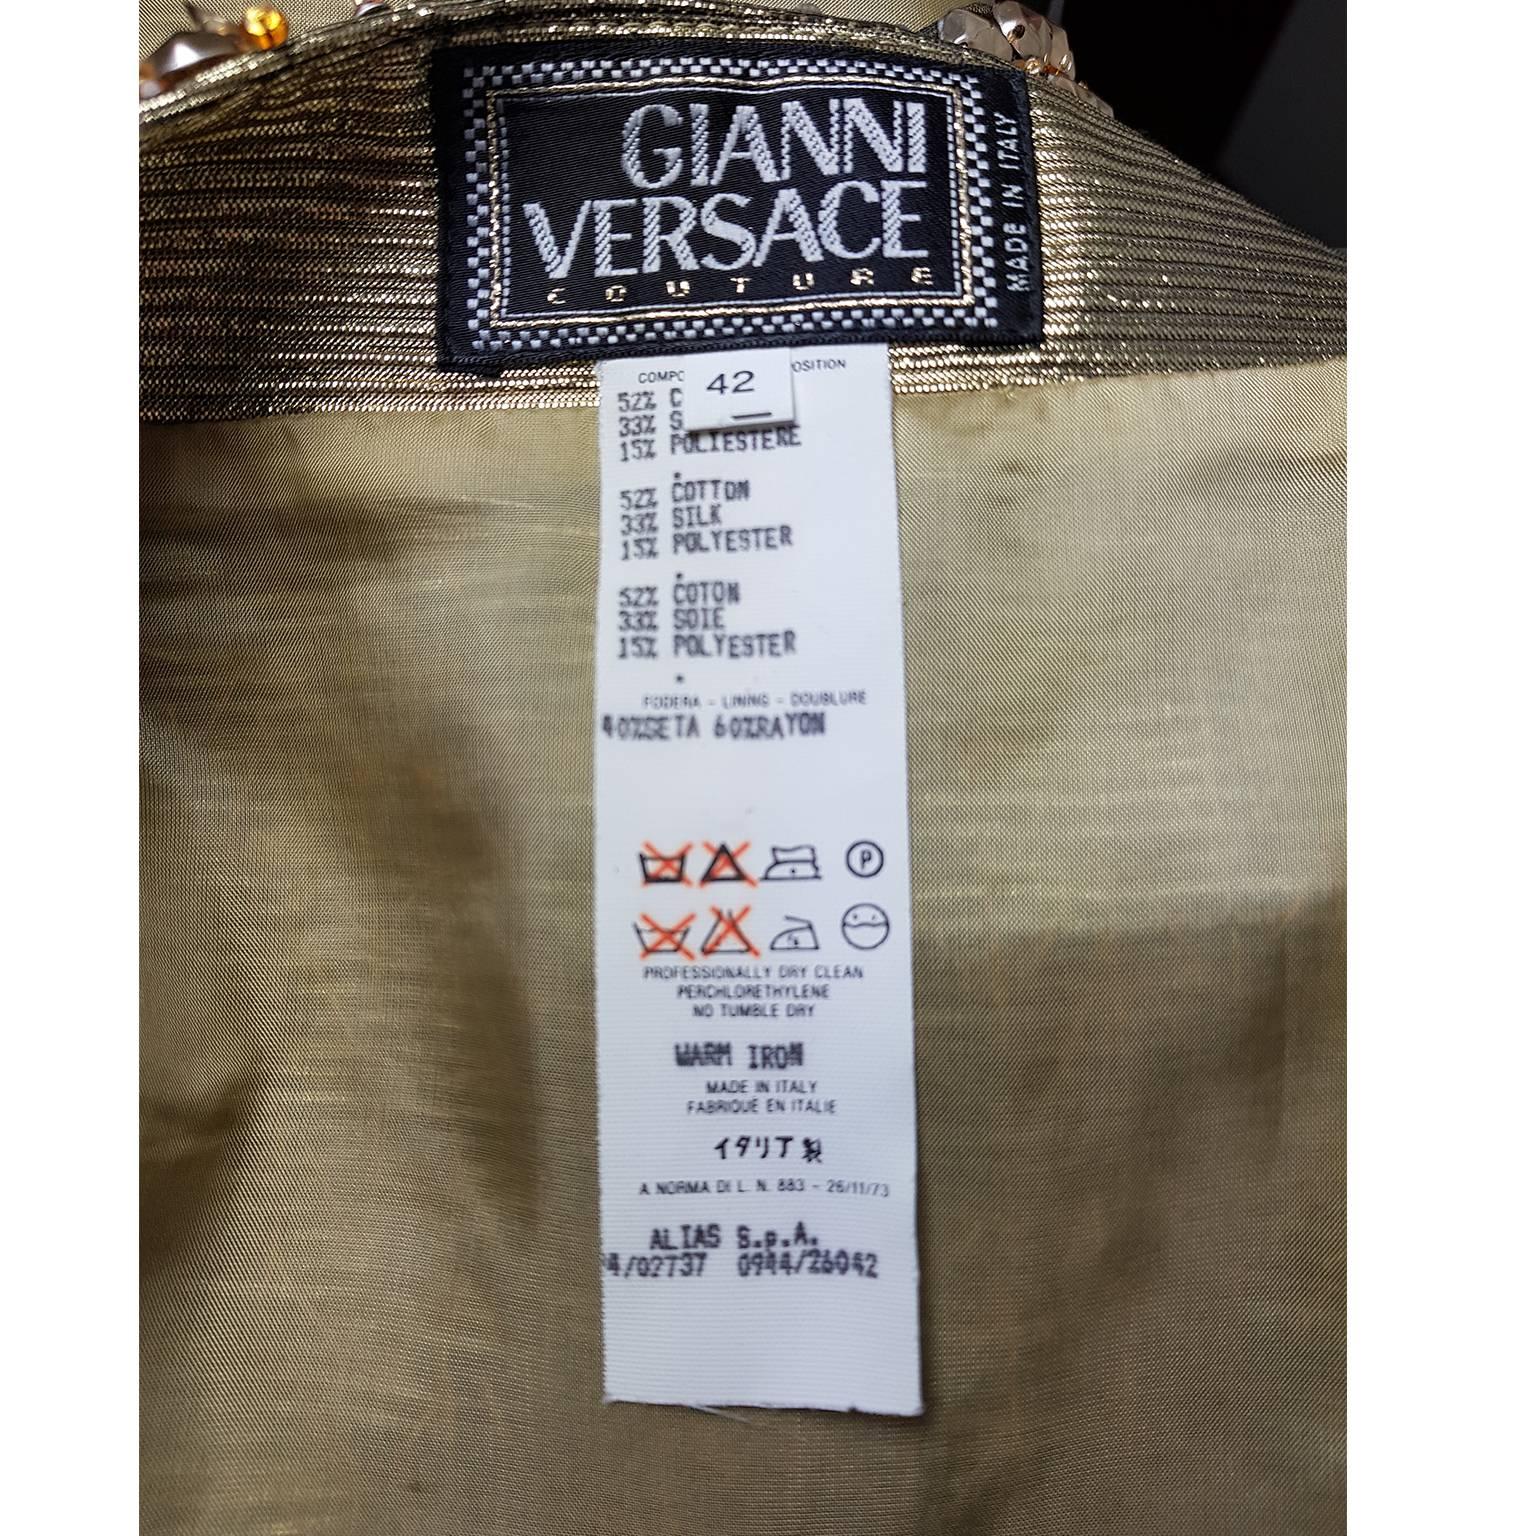 Women's Gianni Versace Couture Golden Jewel Skirt AW 1994 For Sale